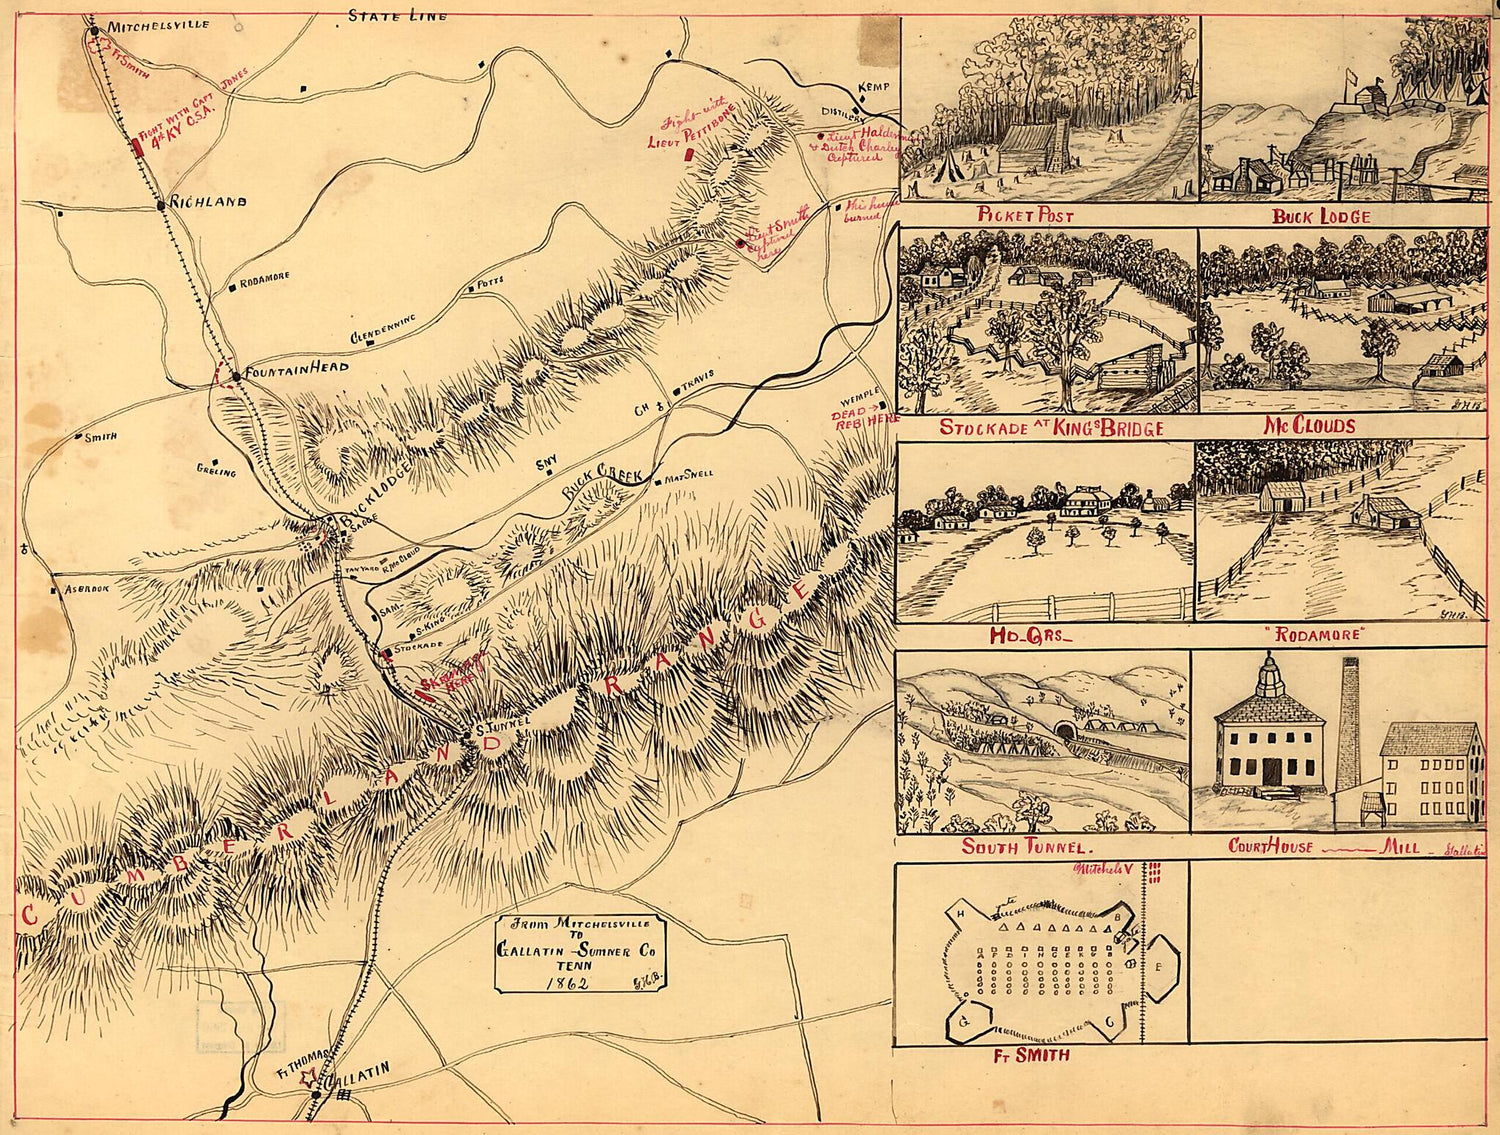 This old map of -Sumner County, Tennessee, from 1862 was created by G. H. Blakeslee in 1862